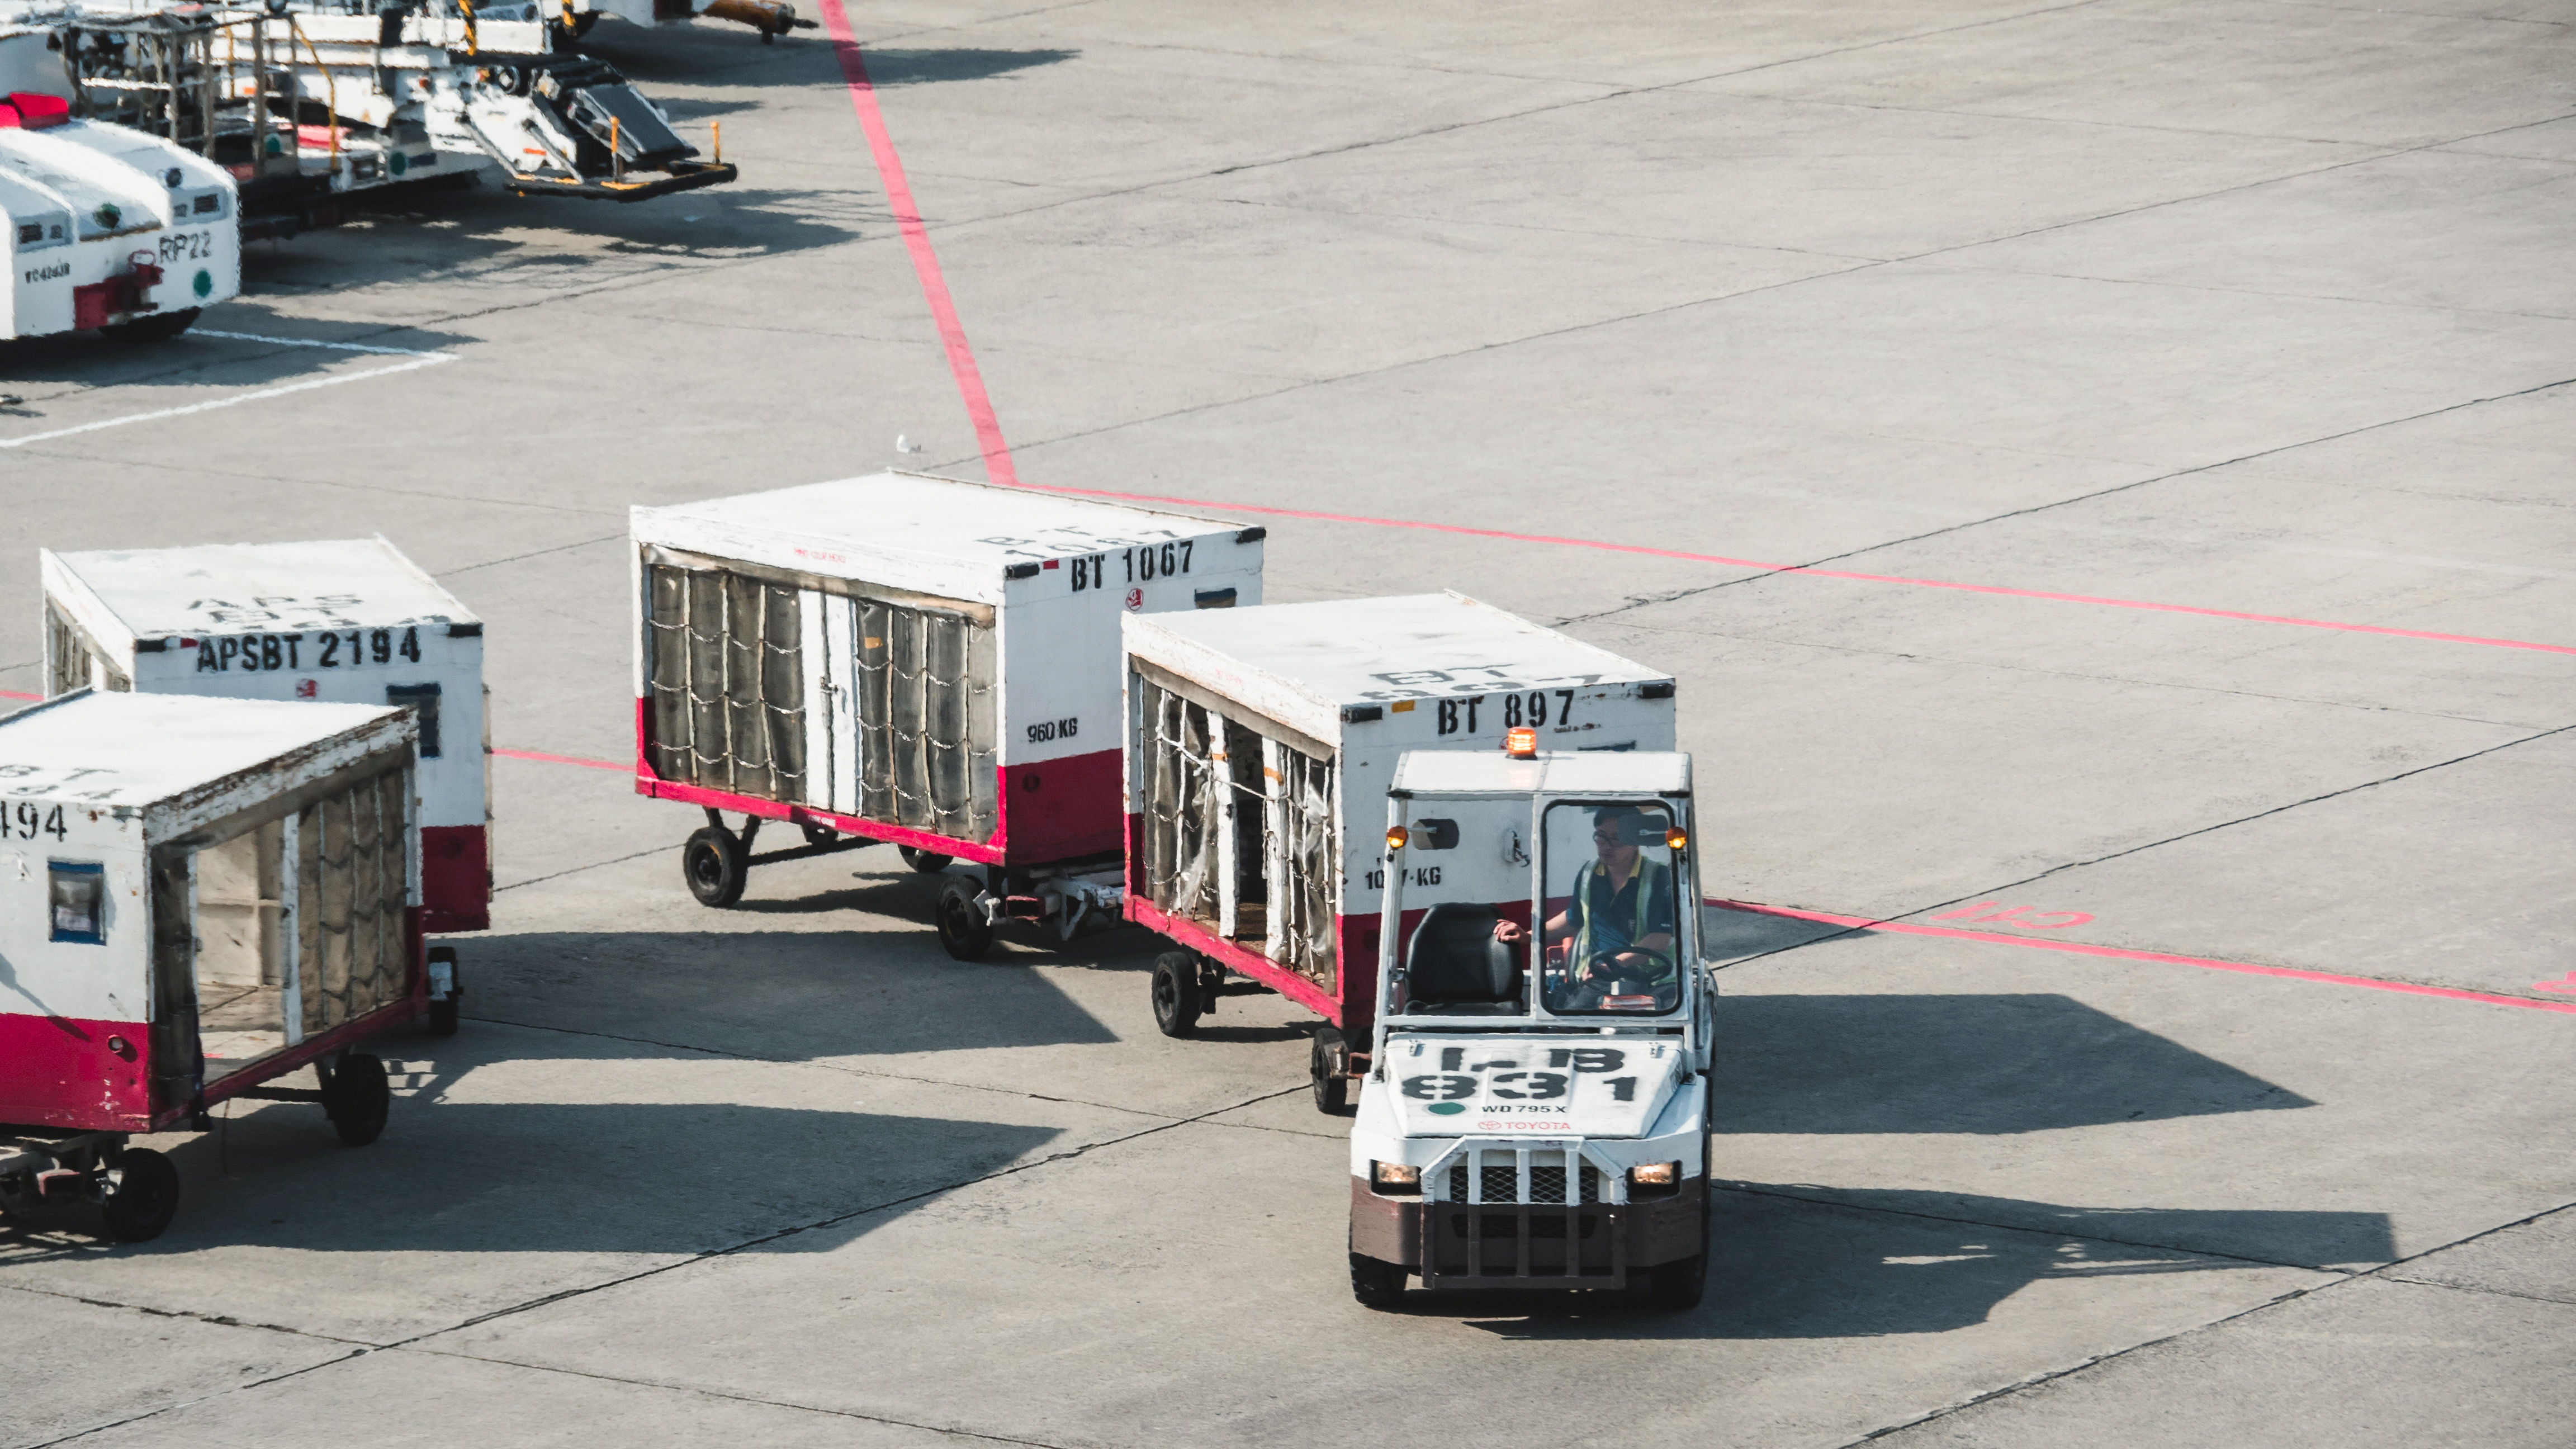 luggage cars on airport